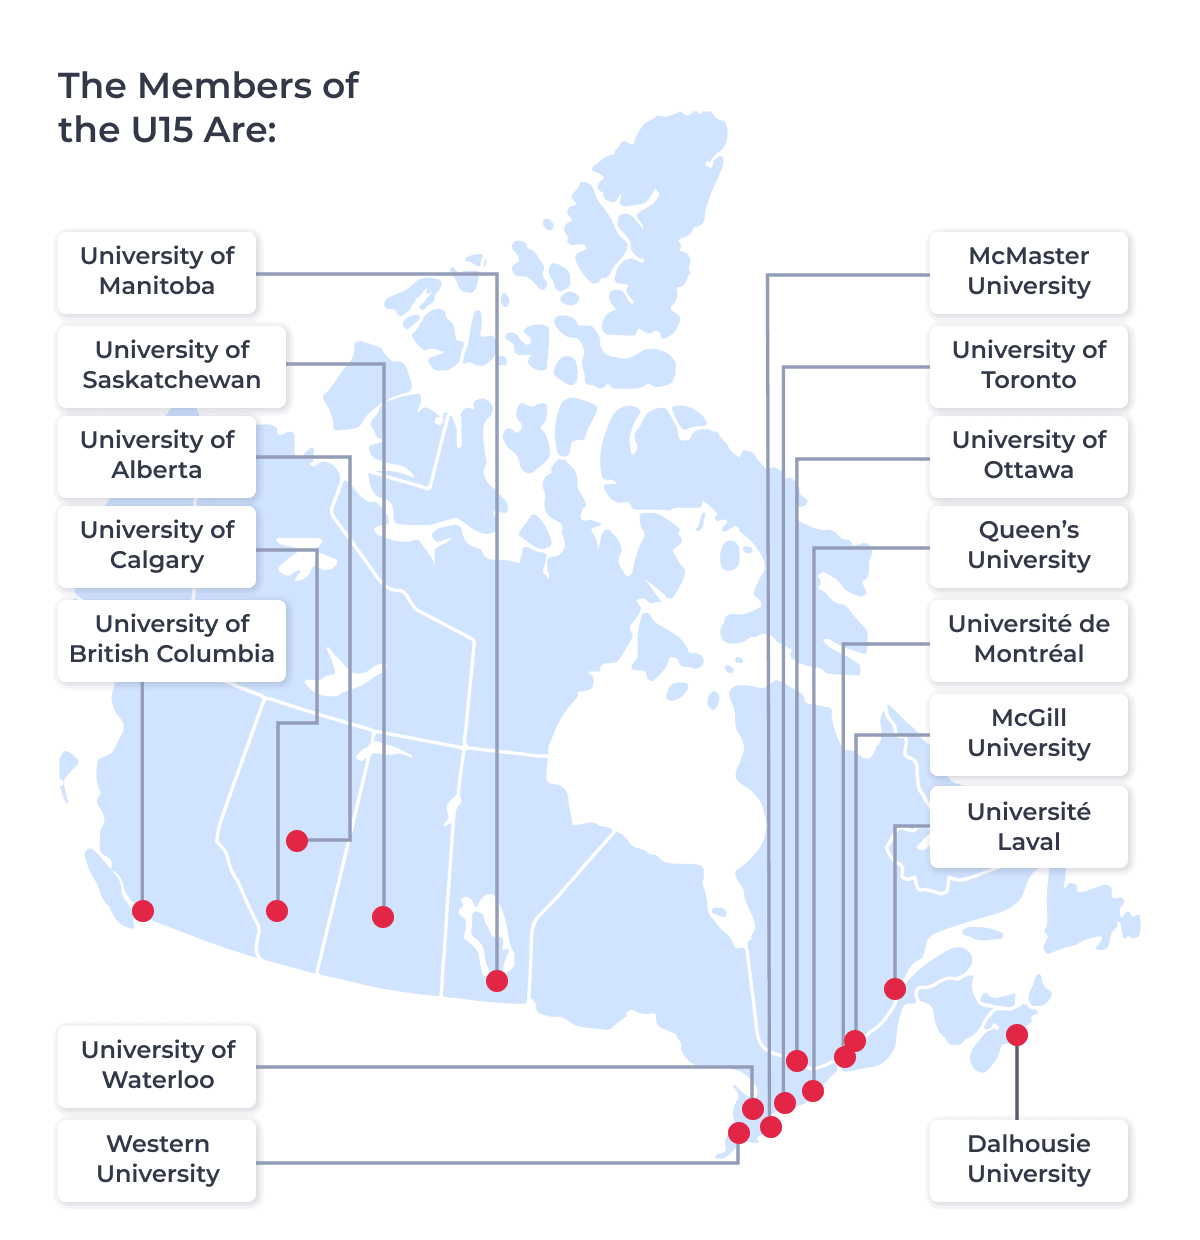 Map of Canada featuring pin locations of all U15 universities